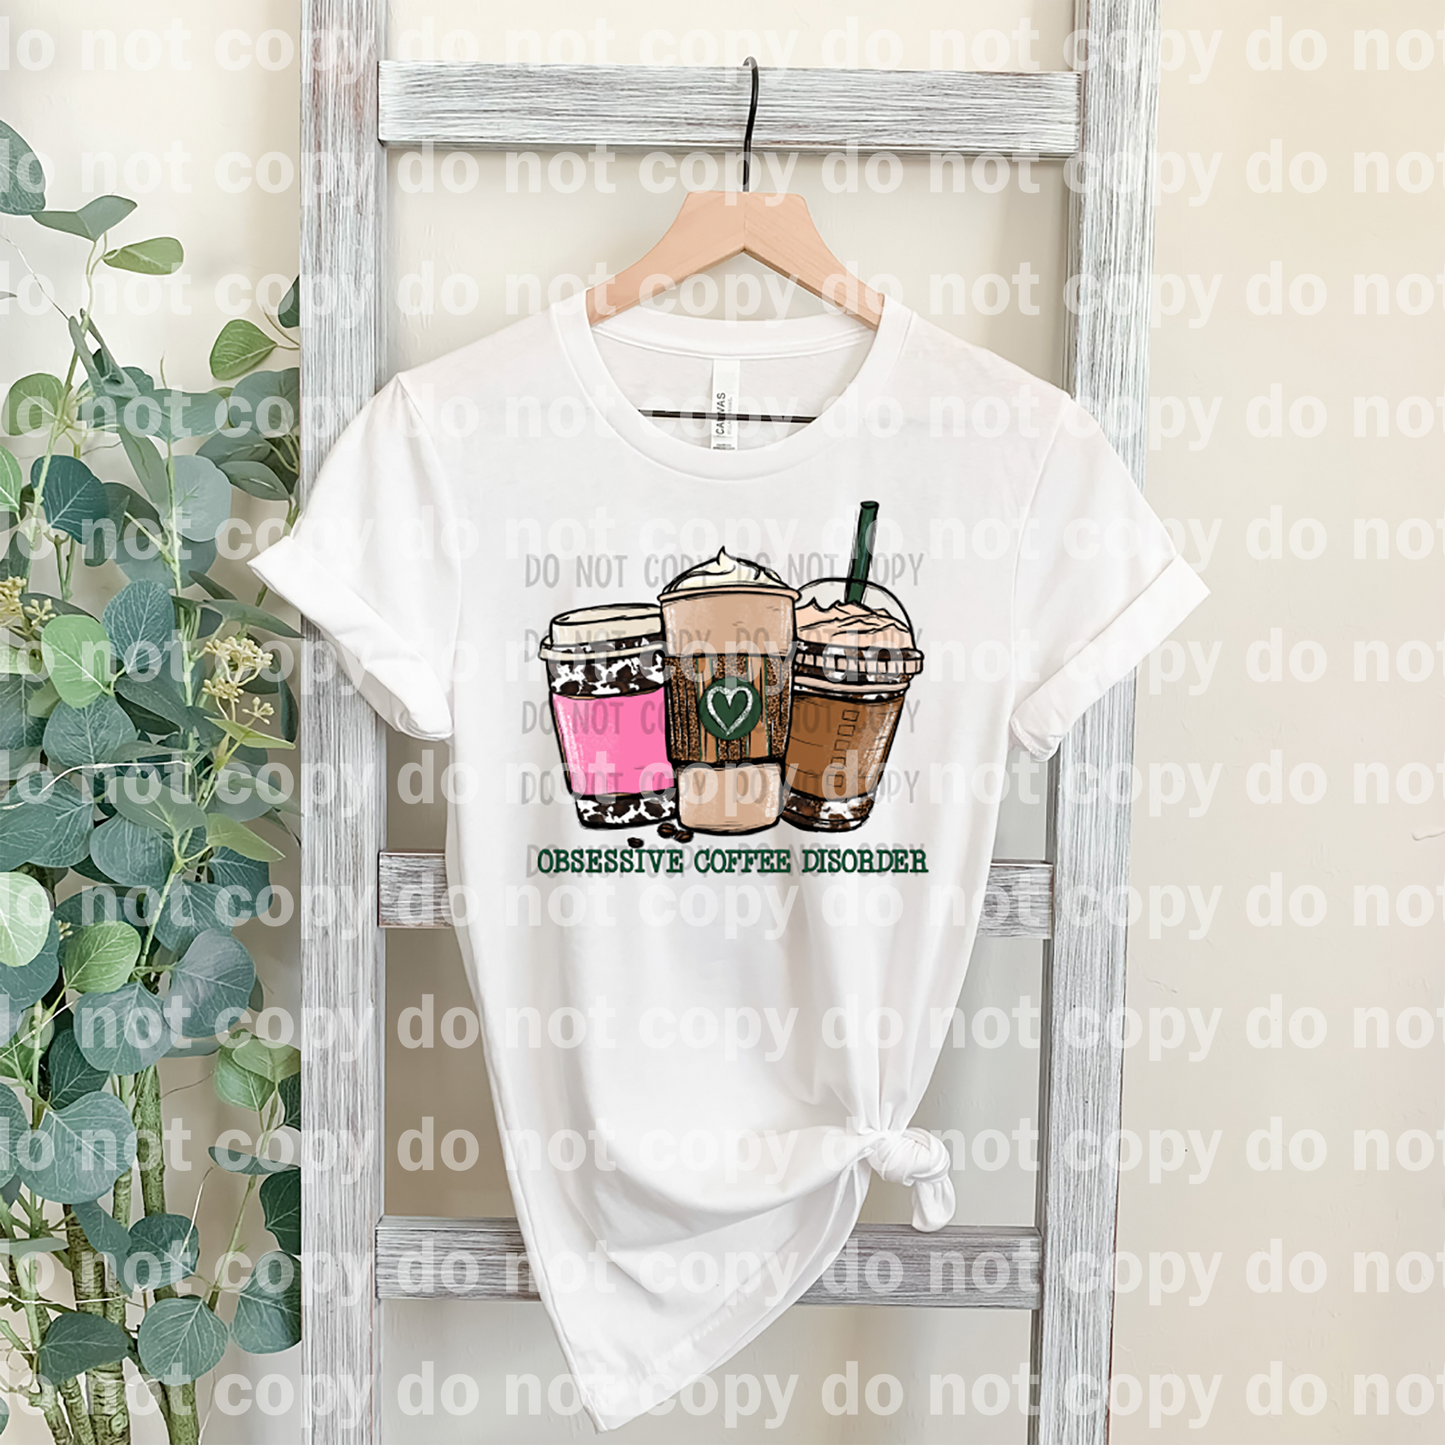 Obsessive Coffee Disorder Heart Dream Print or Sublimation Print